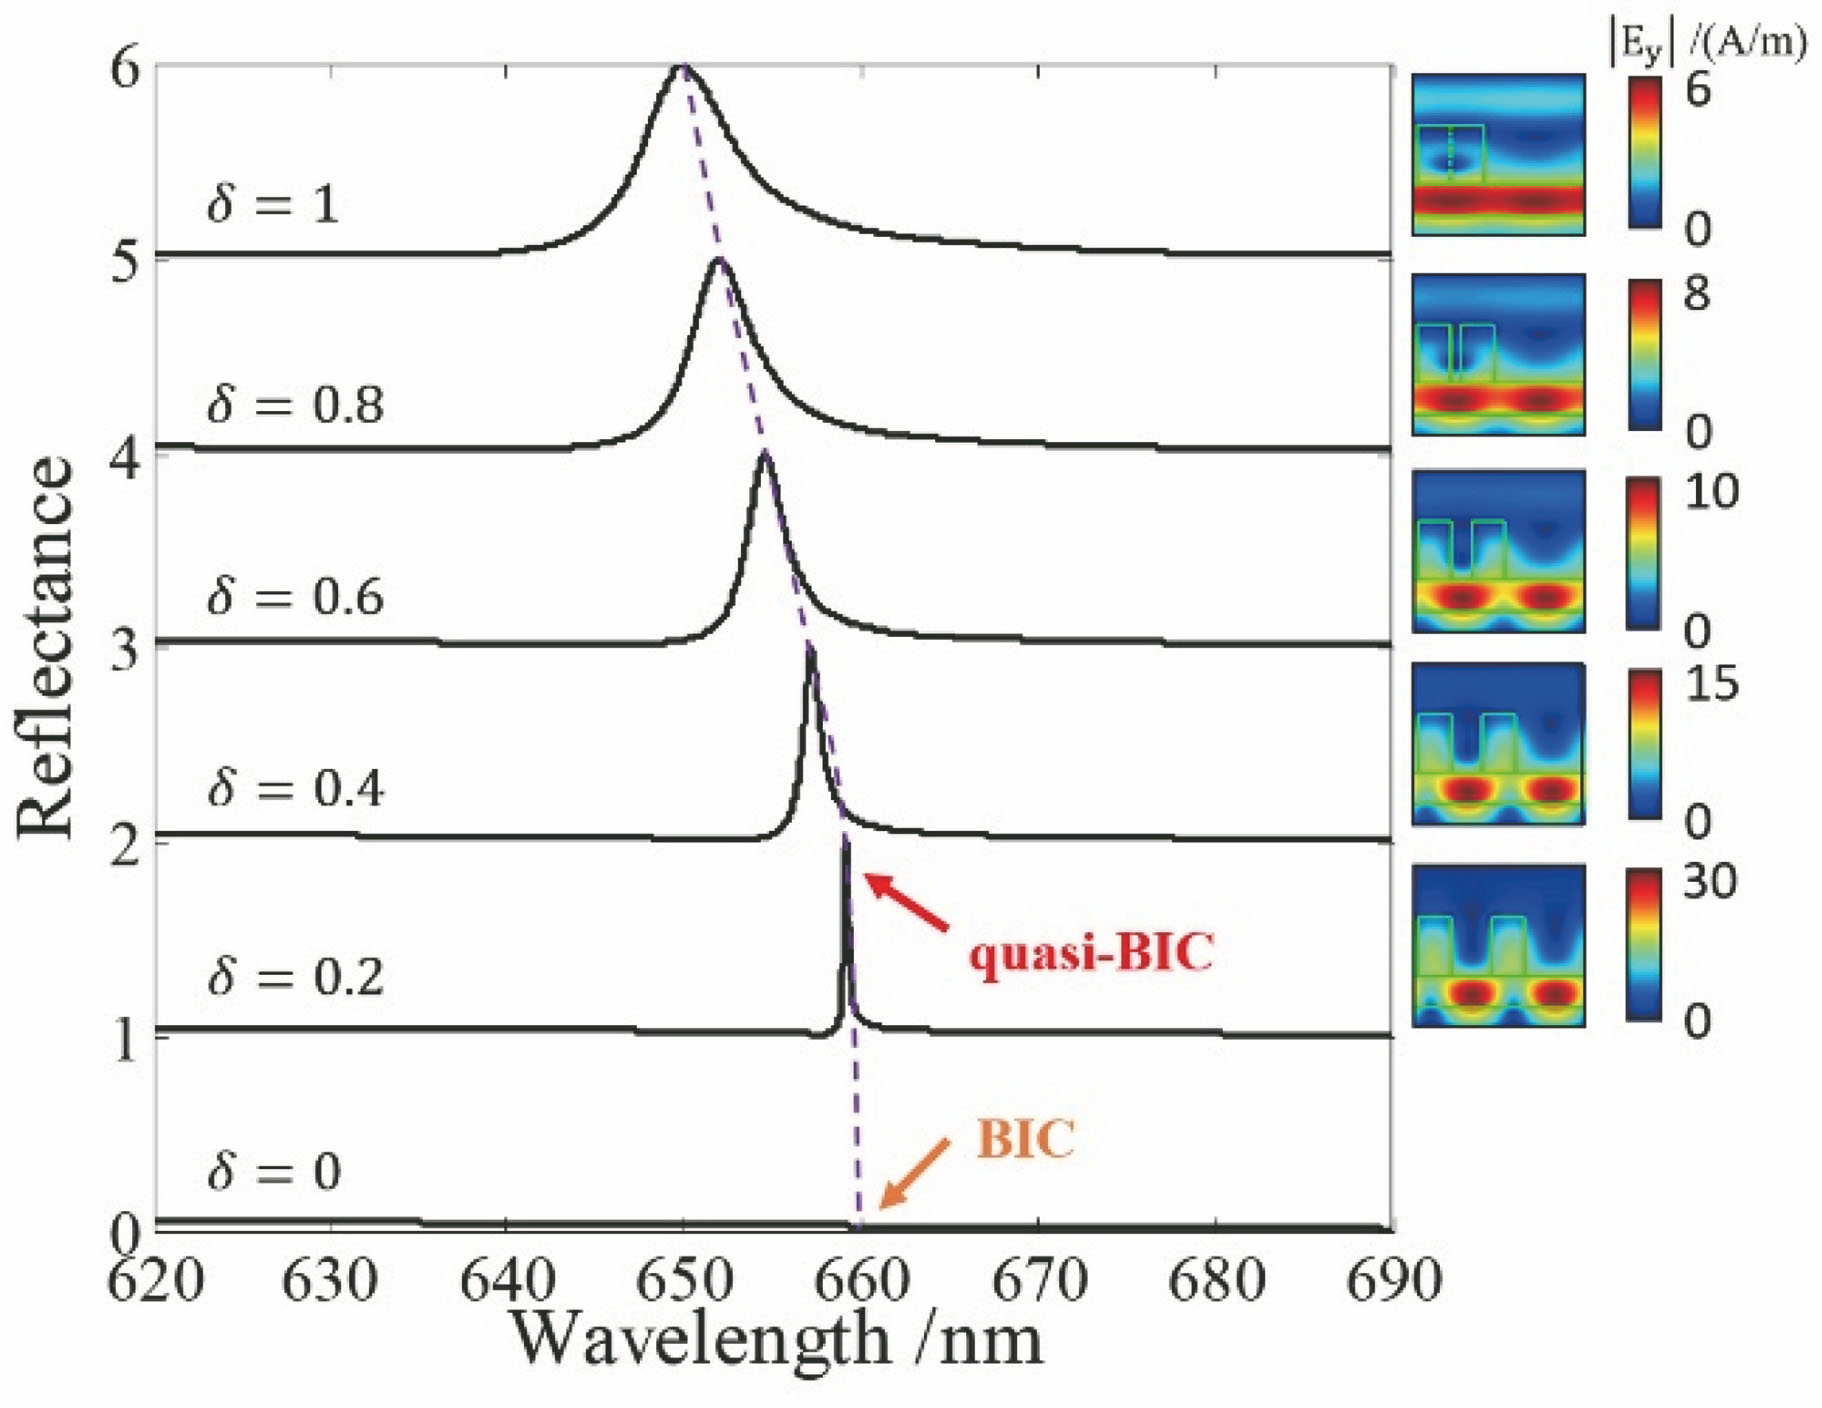 Zero-order reflectance spectra of grating-waveguide composite structure for different δ and corresponding electric field intensity distributions at reflectance peaks[59]